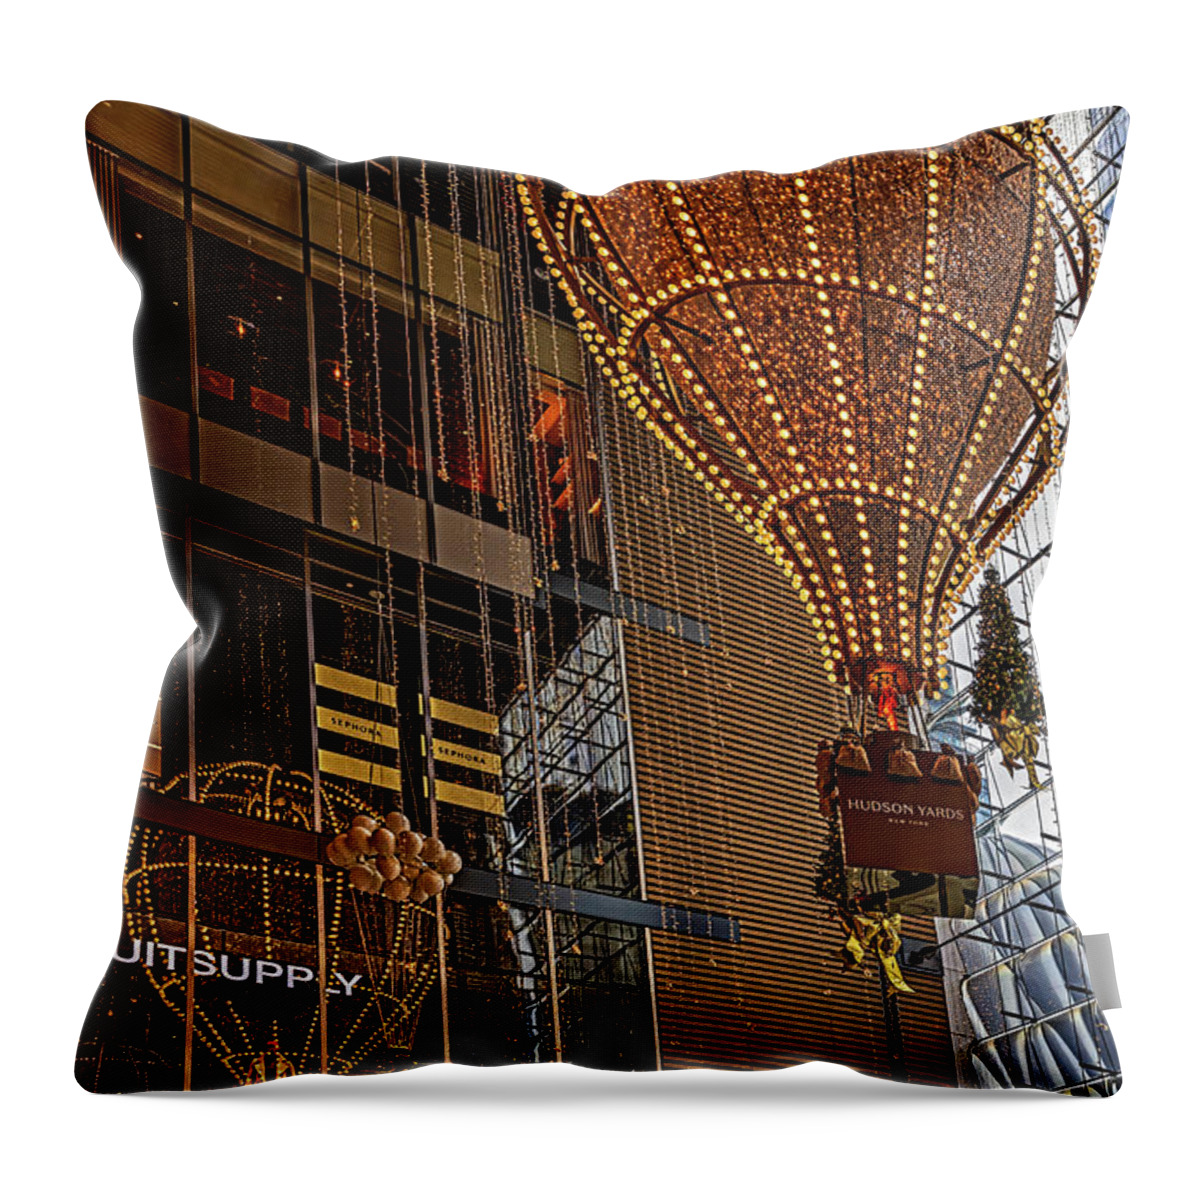 Nyc Throw Pillow featuring the photograph Hudson Yards Shops Christmas V by Susan Candelario